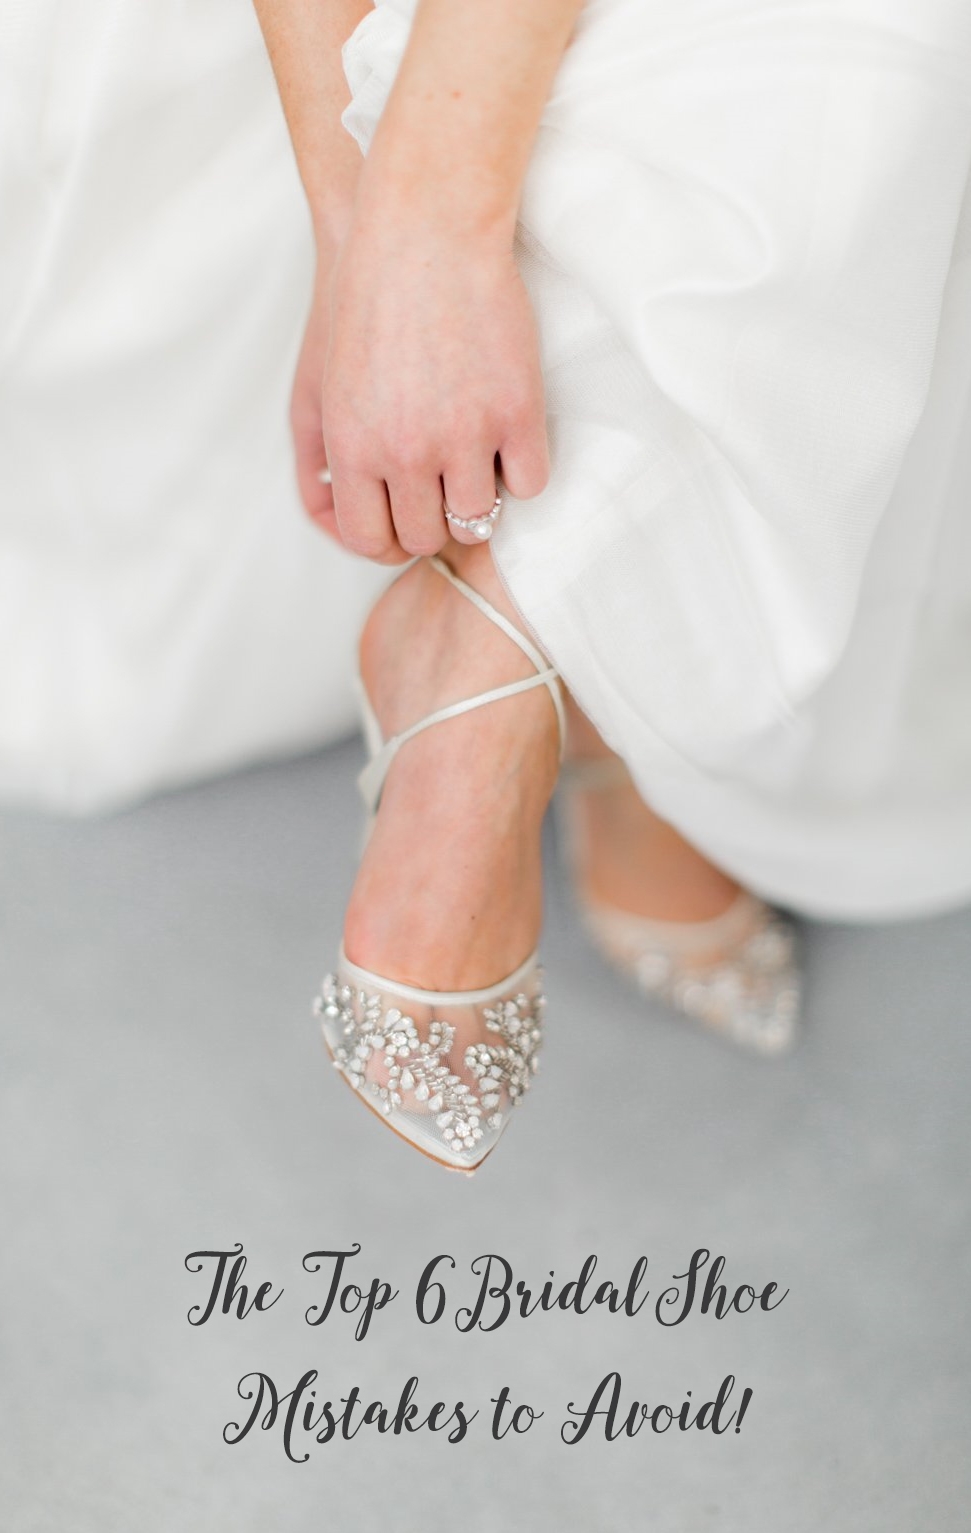 Top 6 Bridal Shoes Mistakes to Avoid